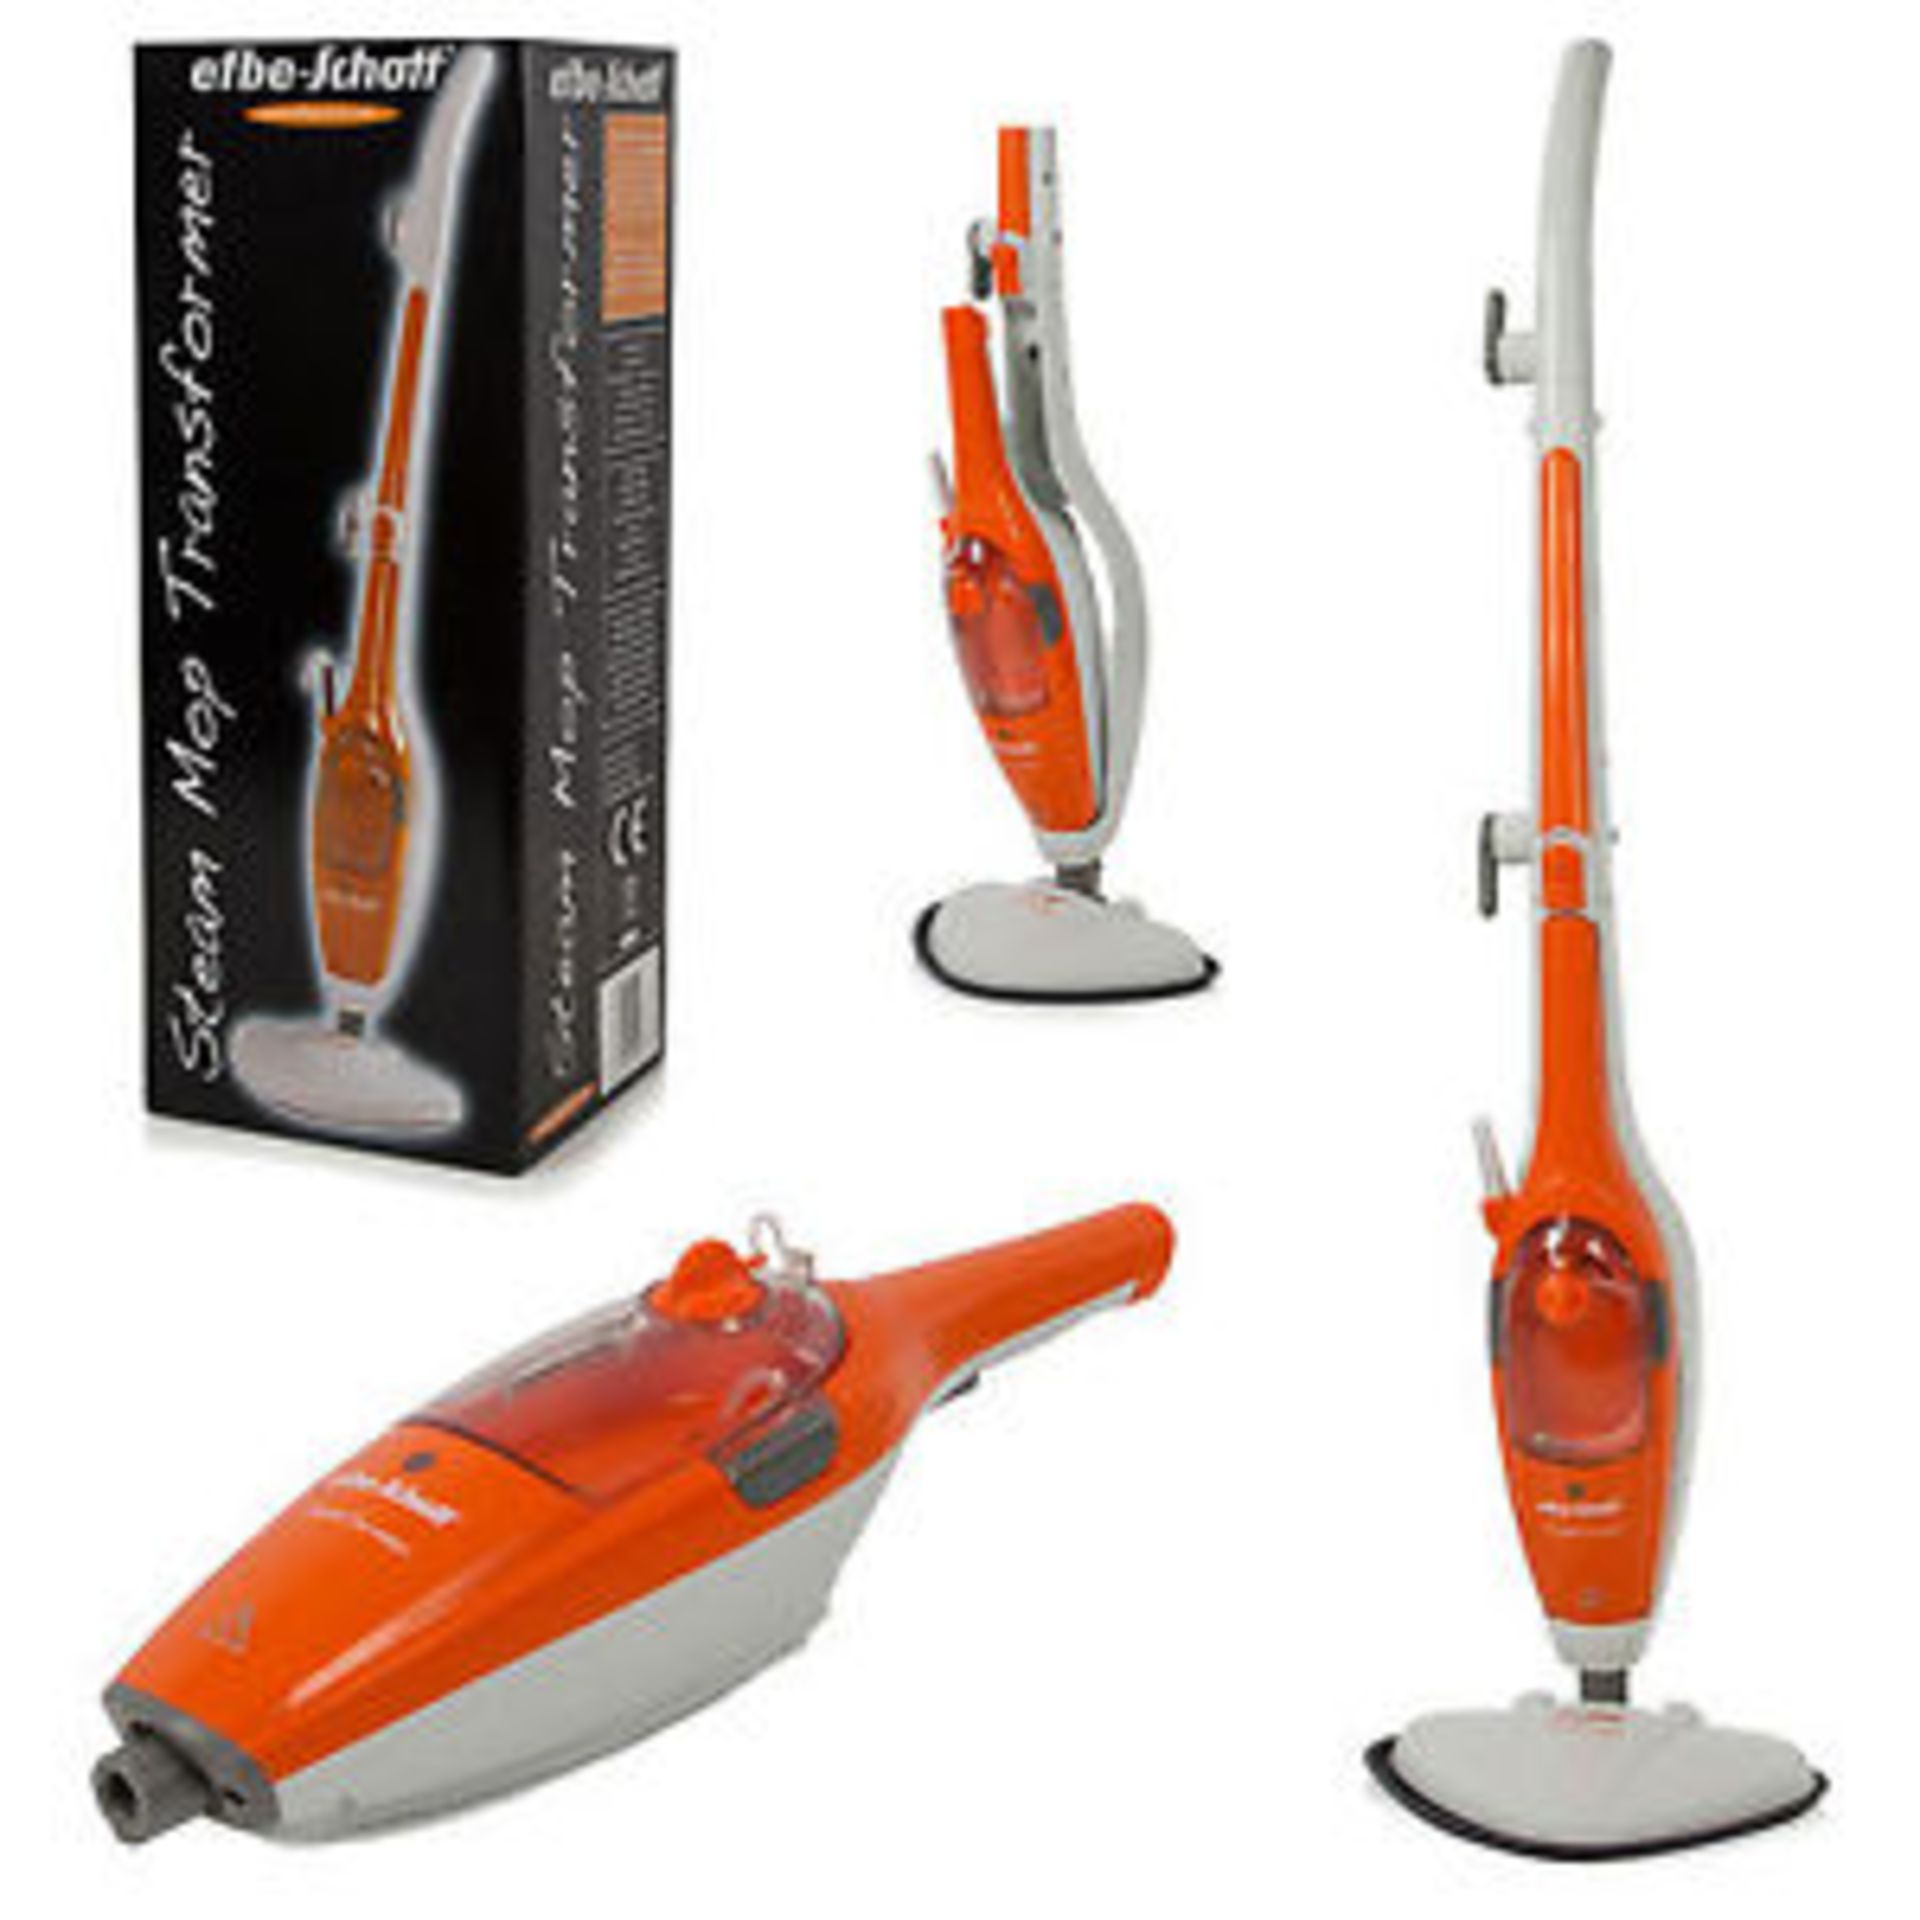 V EFBE 1300watt Steam Mop (colour may vary from picture) Brand New Boxed RRP £59.99